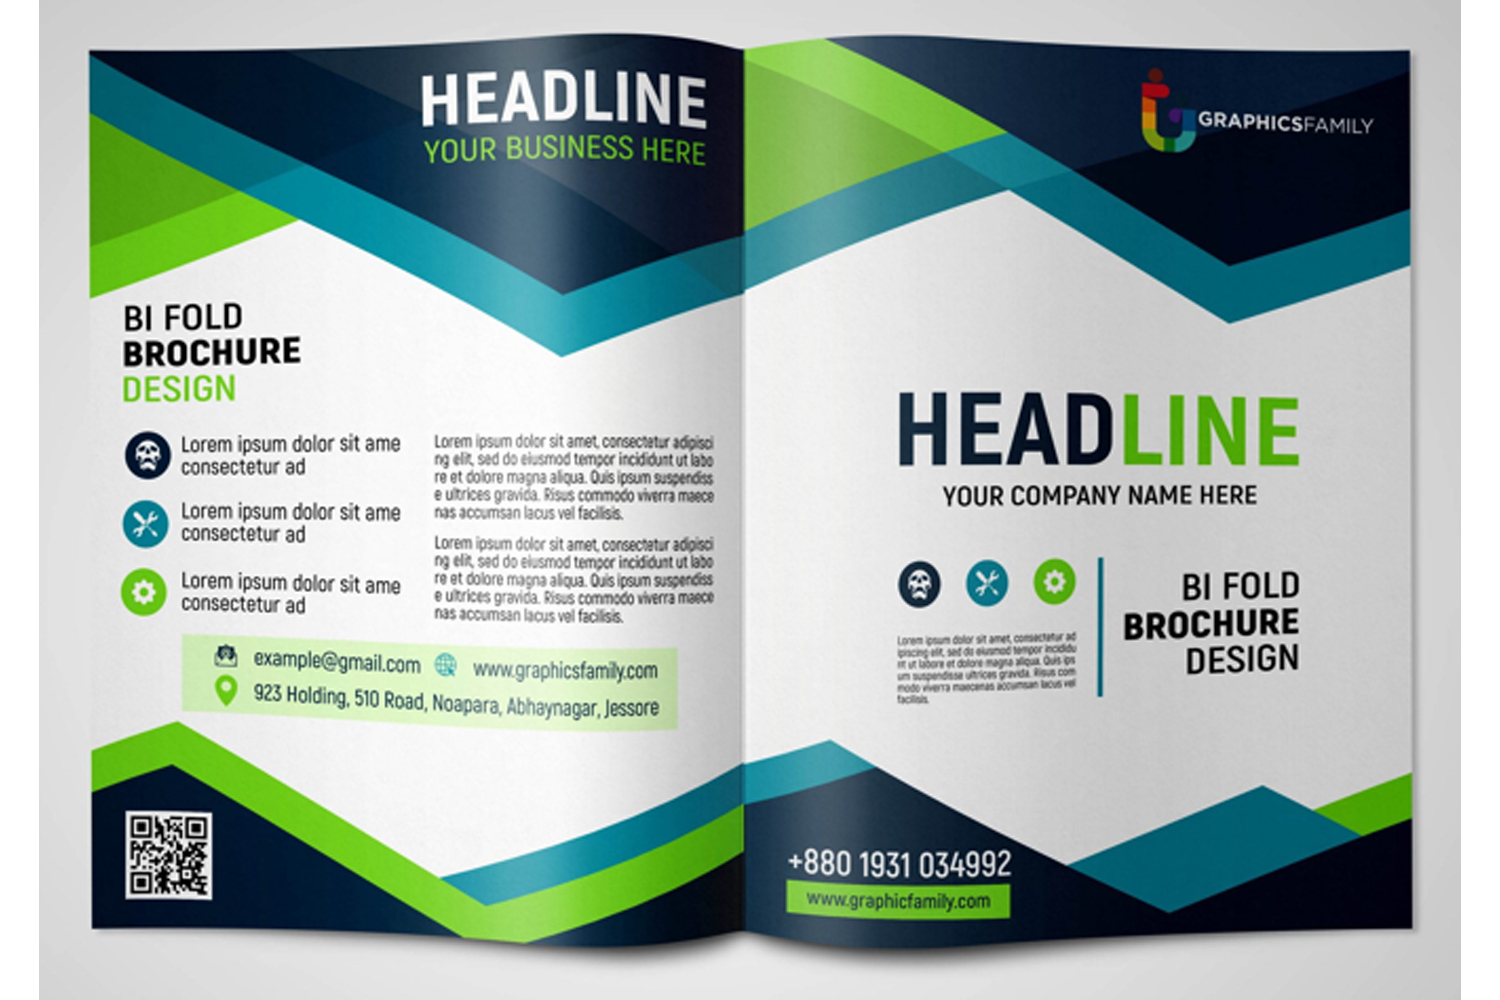 Business Brochure Template PSD Free Download